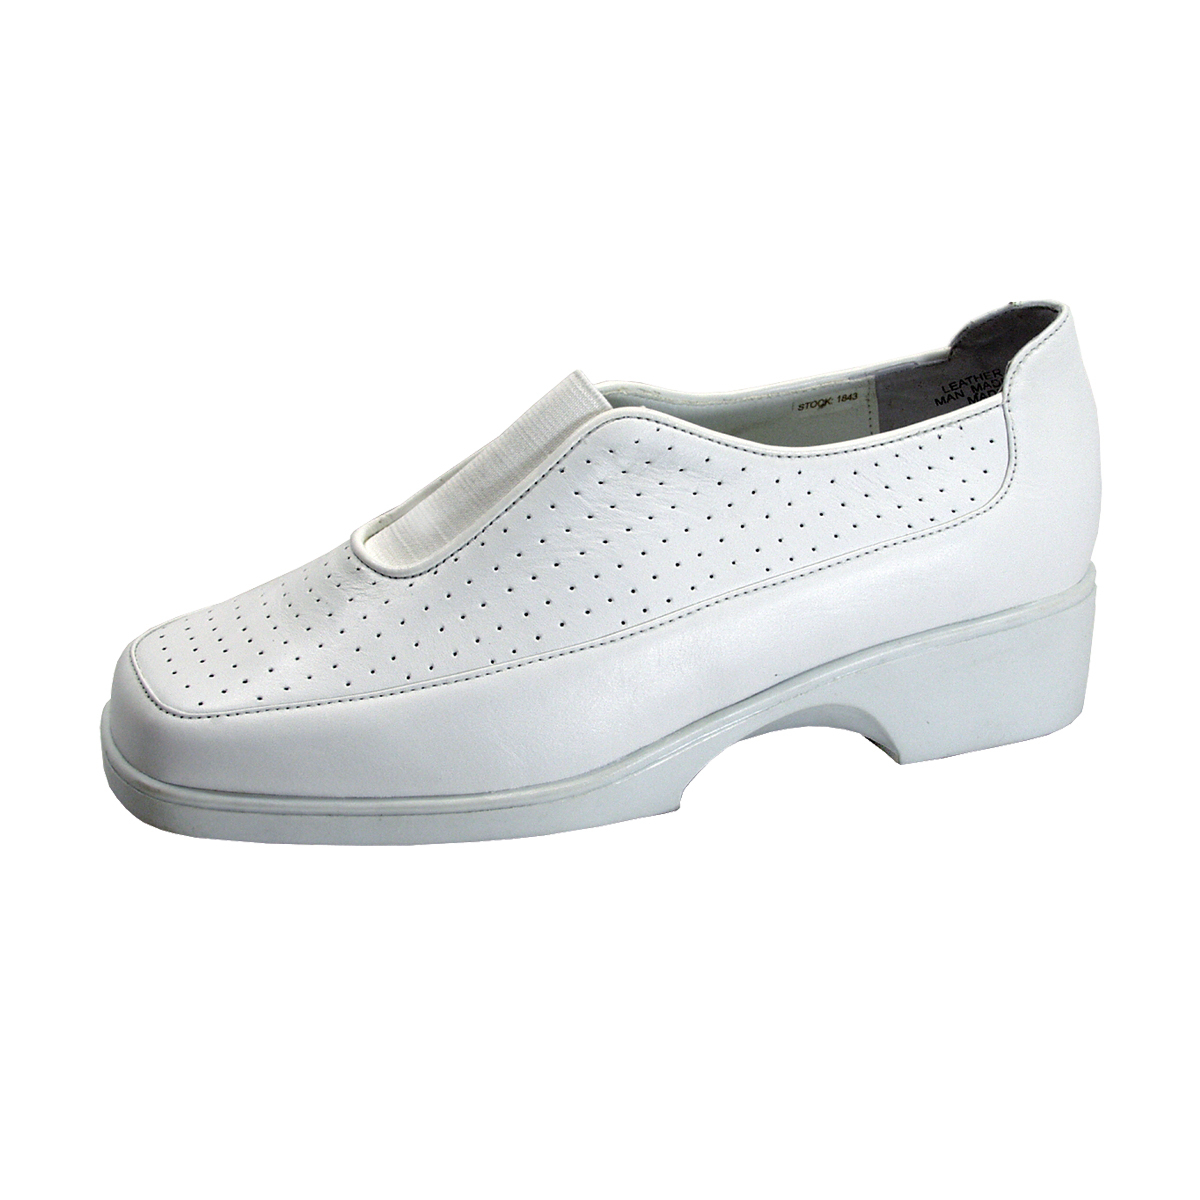 Primary image for 24 HOUR COMFORT Tatum Women's Wide Width Leather Slip-On Shoes